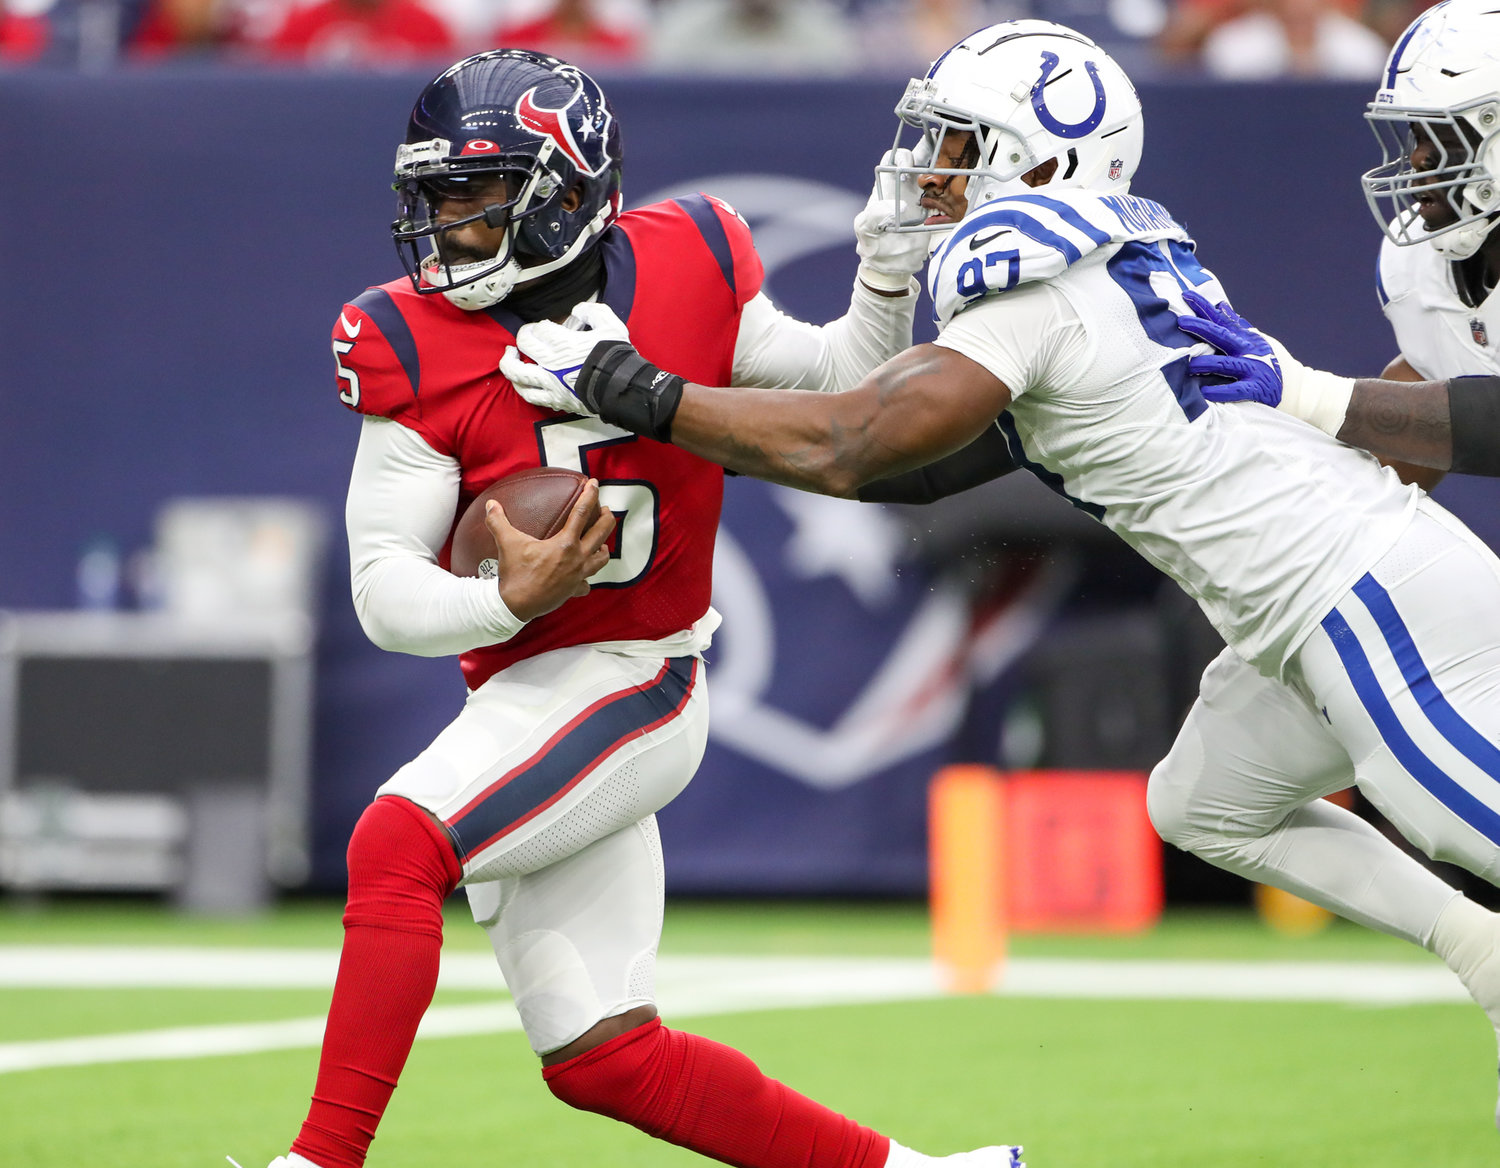 Indianapolis Colts defensive end Al-Quadin Muhammad (97) sacks Houston Texans quarterback Tyrod Taylor (5) during an NFL game between the Texans and the Colts on December 5, 2021 in Houston, Texas.